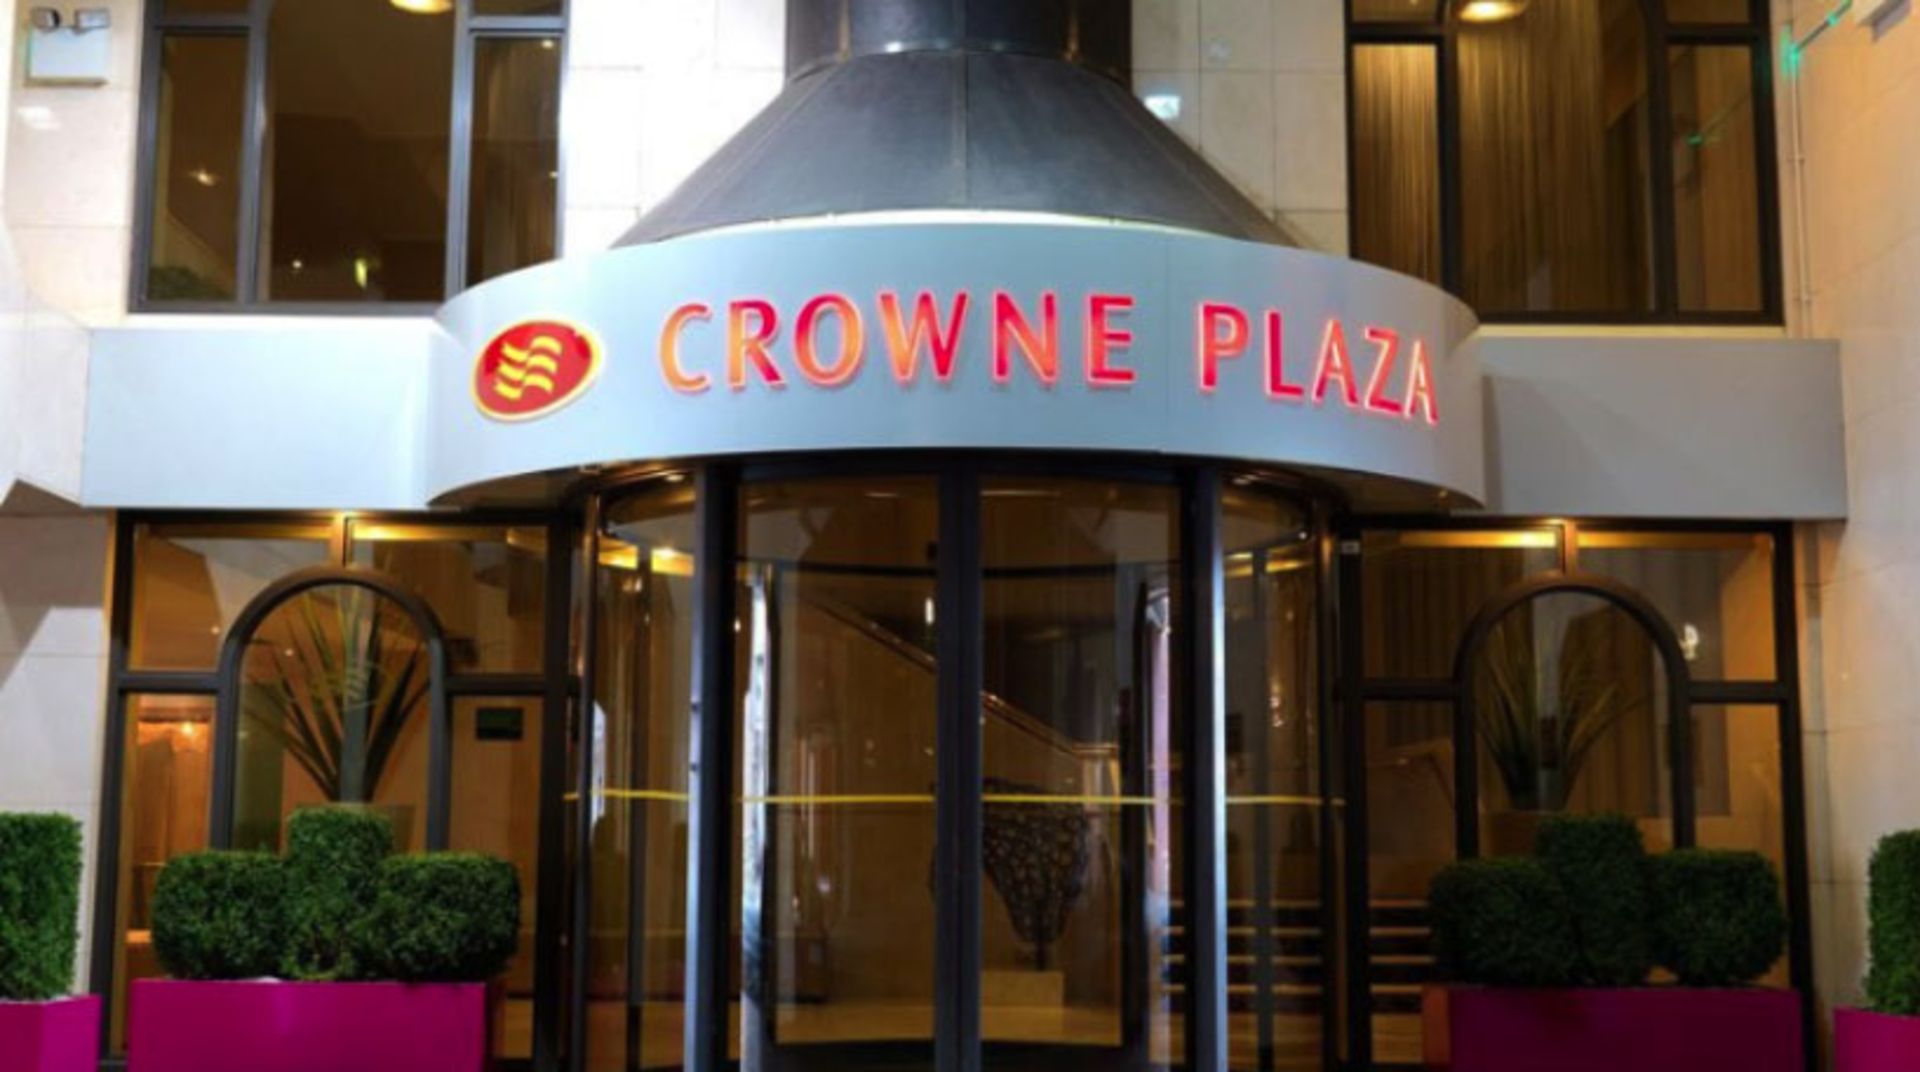 Two nights with dinner in the 4* Crowne Plaza Hotel Chester.